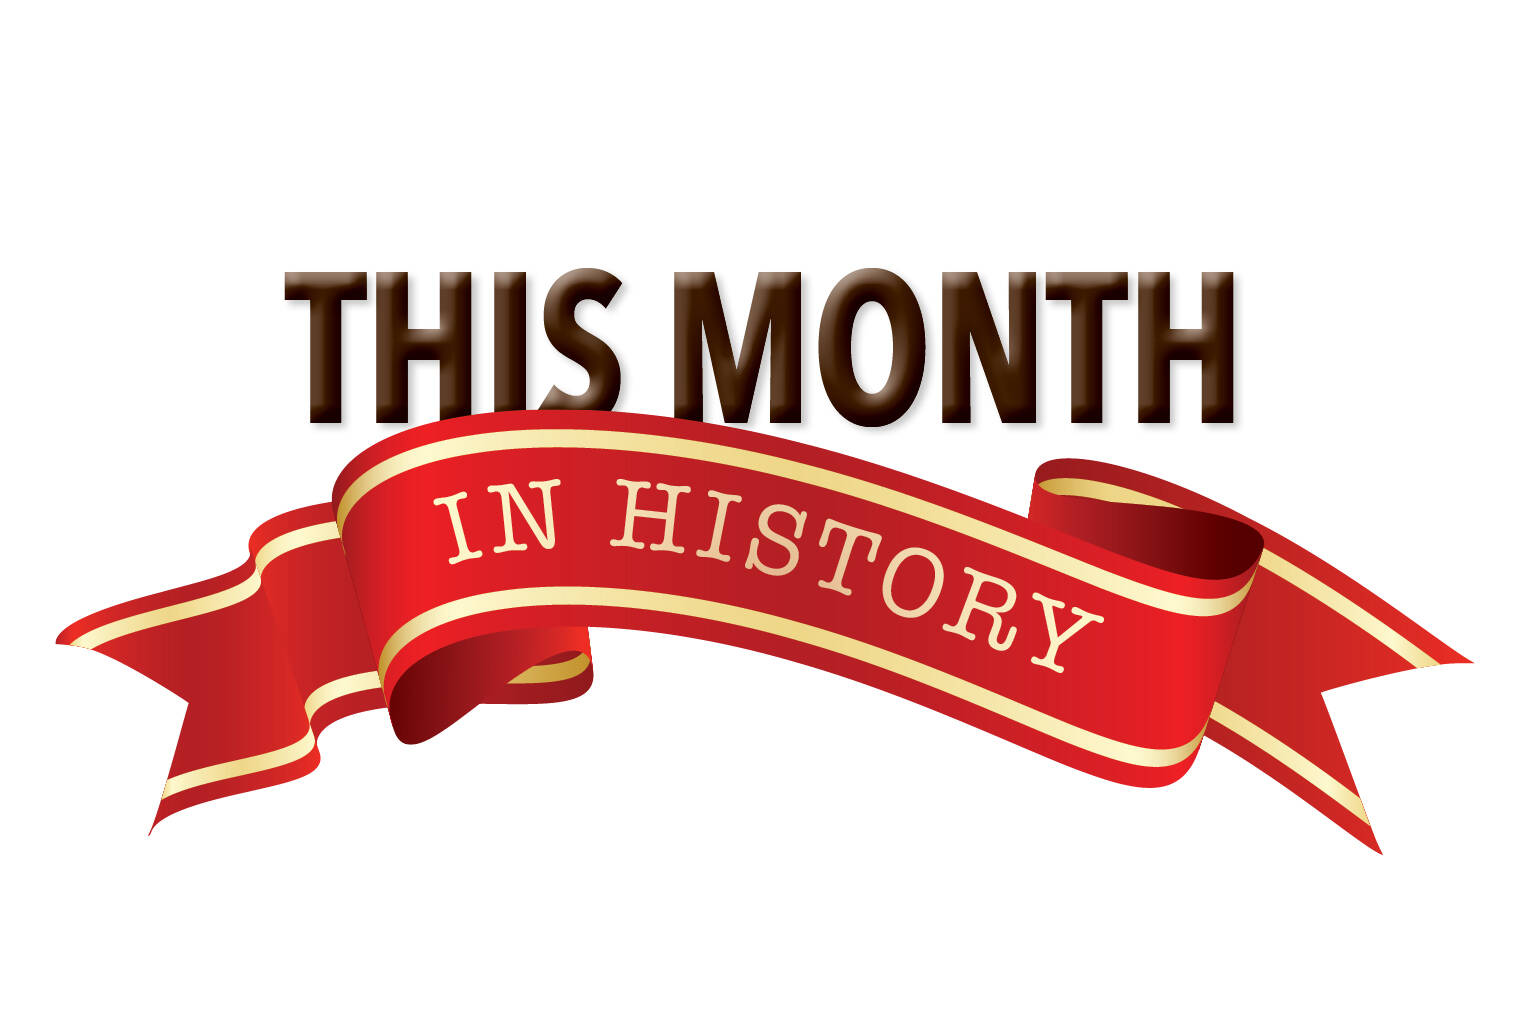 This Month In History.